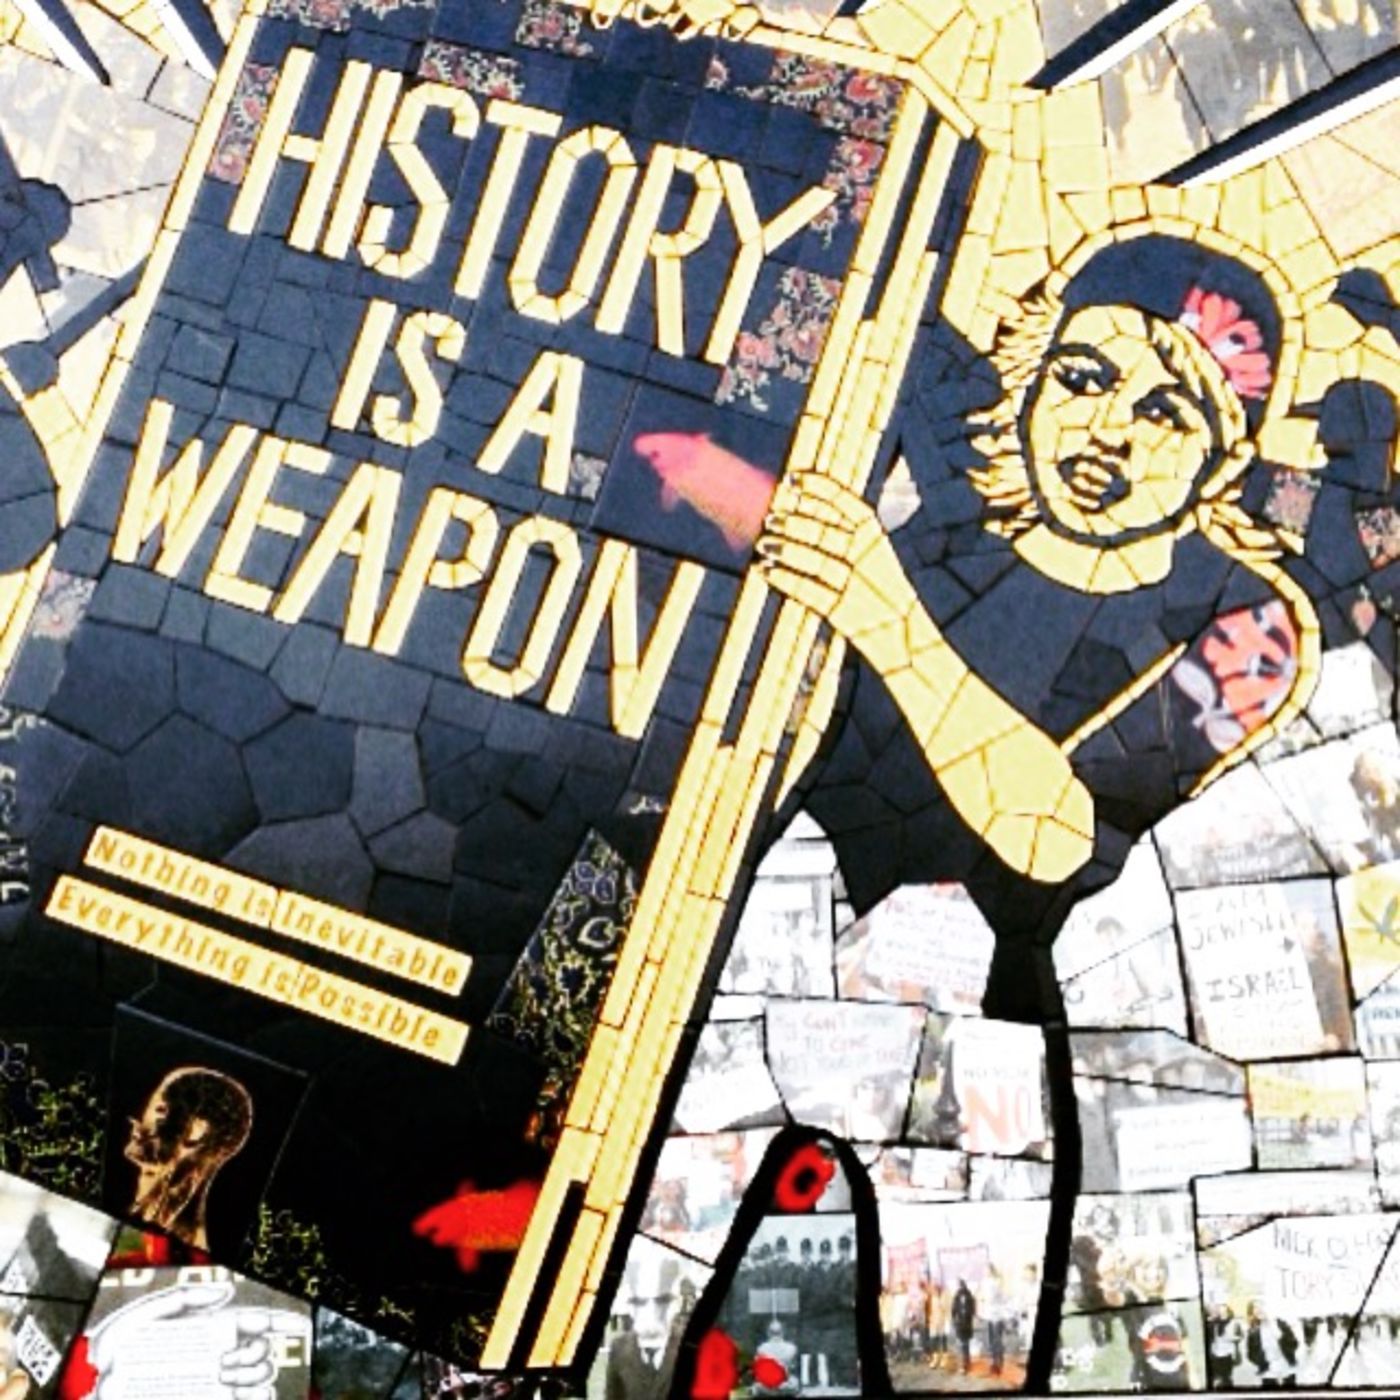 UNLOCKED! History is a Weapon #1: Historical Materialism w/ Sean KB